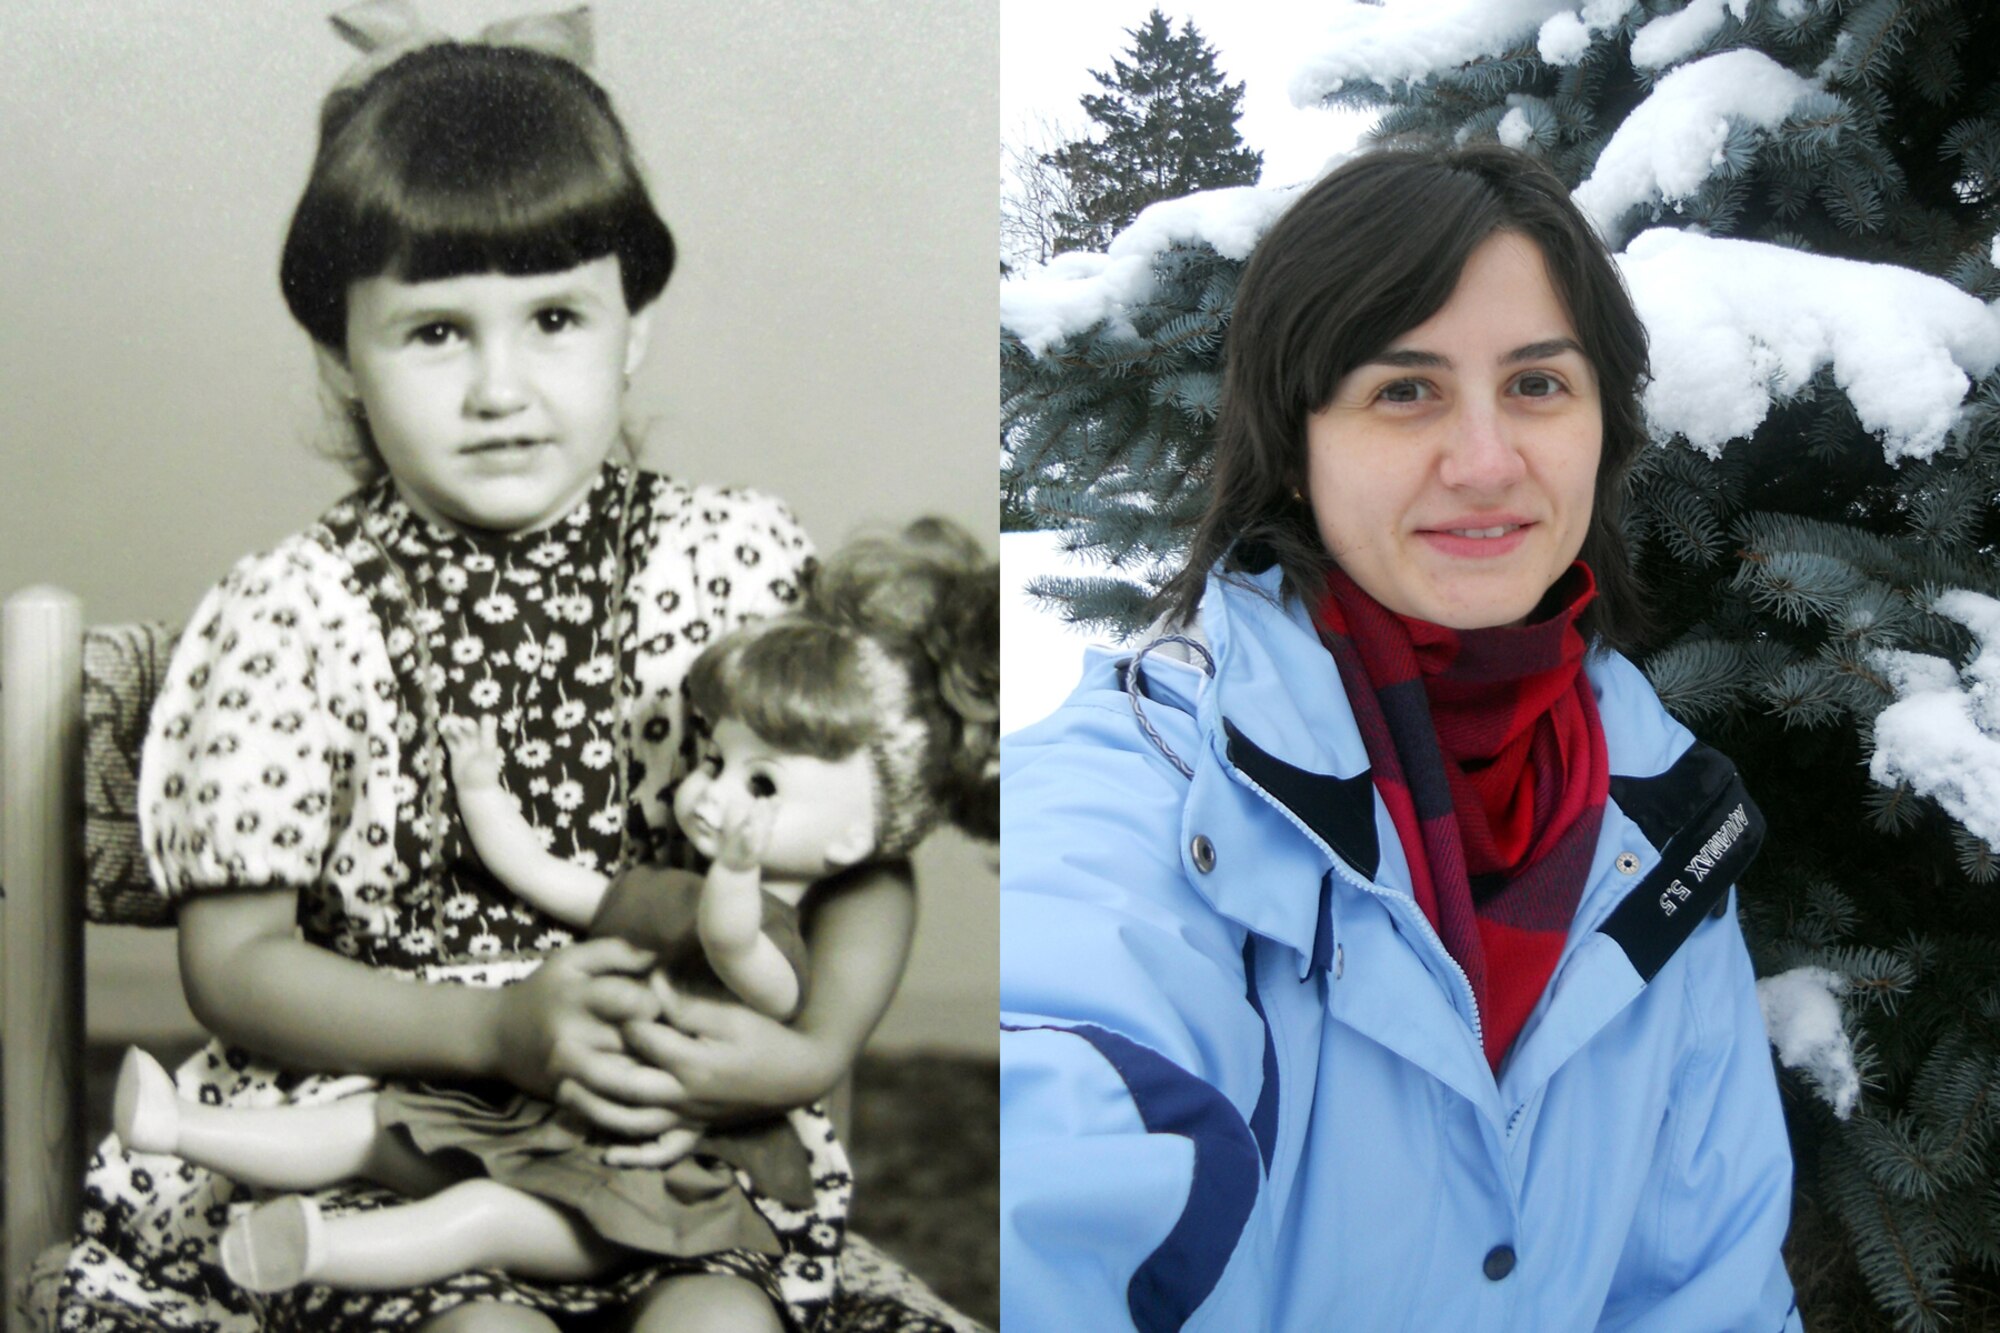 Four-year-old Eva Klimentova poses for a portrait in Studenka, Czechoslovakia, in 1988. Eva immigrated to the United States in 2013, and became an America Citizen in 2016. (Courtesy photos)